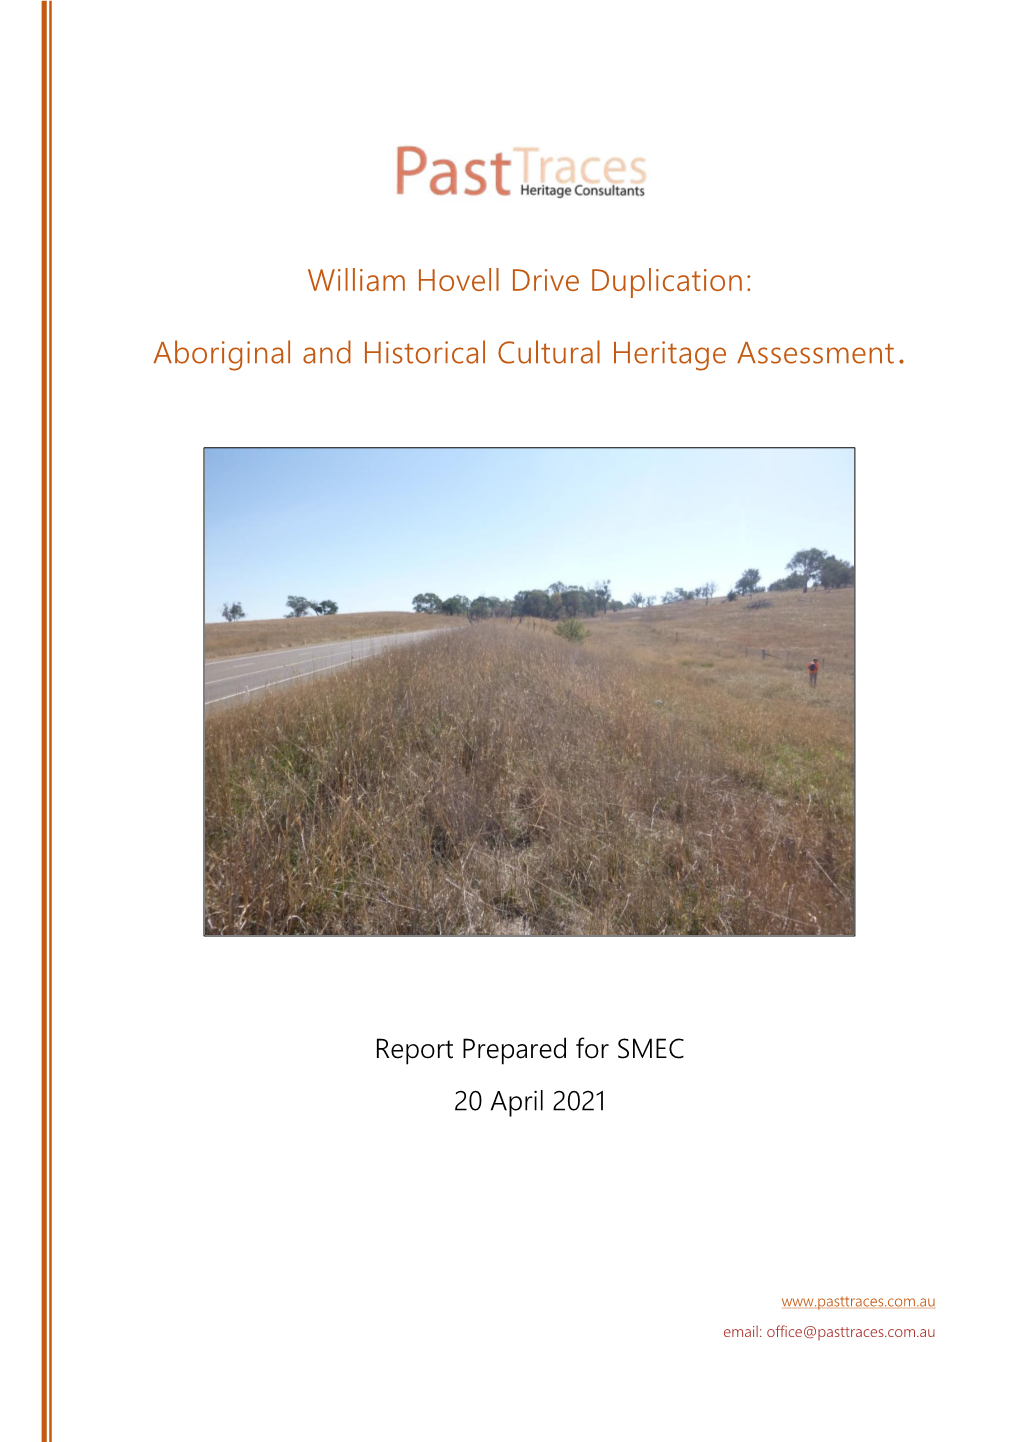 William Hovell Drive Duplication: Aboriginal and Historical Cultural